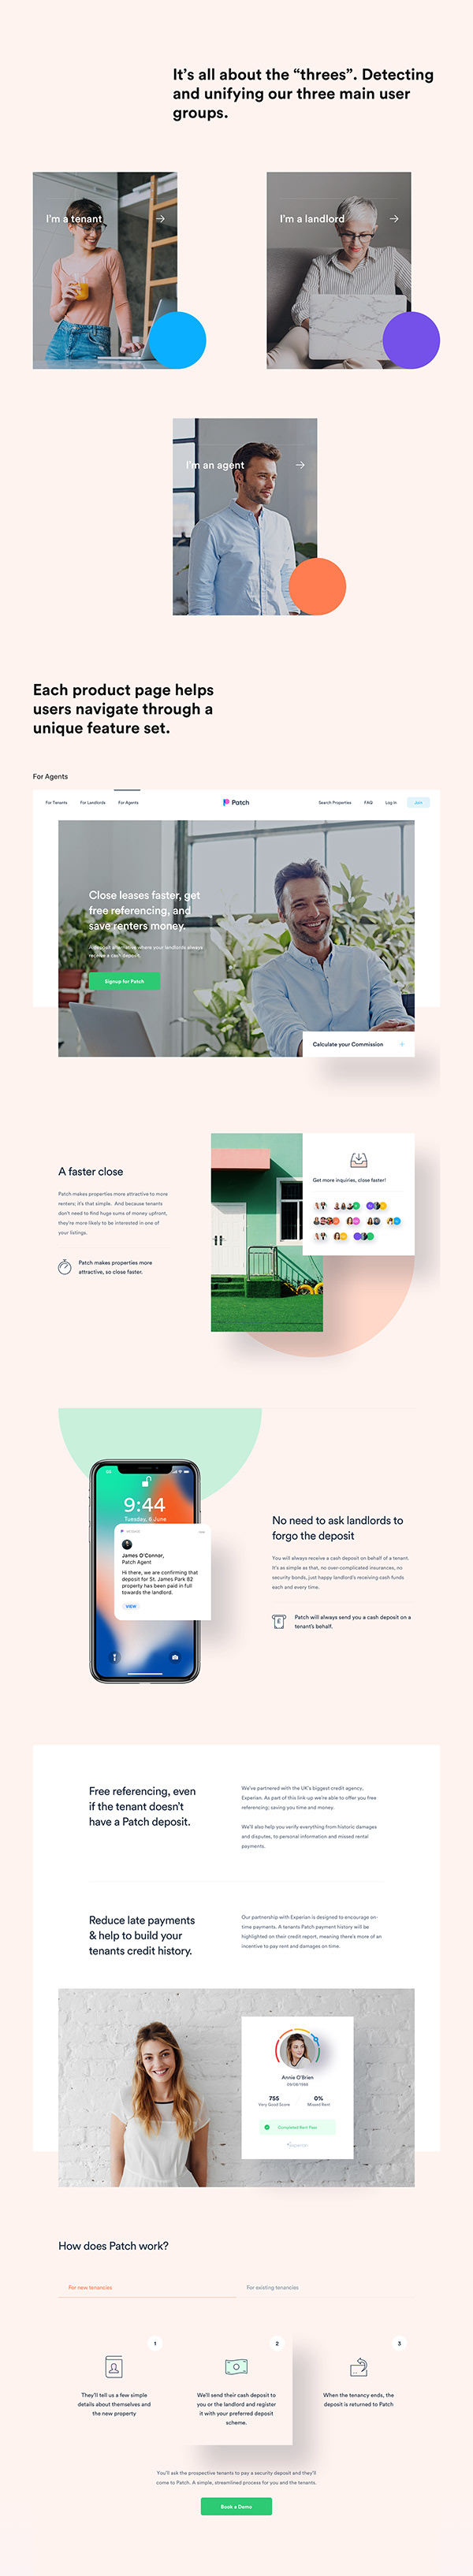 Patch - Web Design and Branding